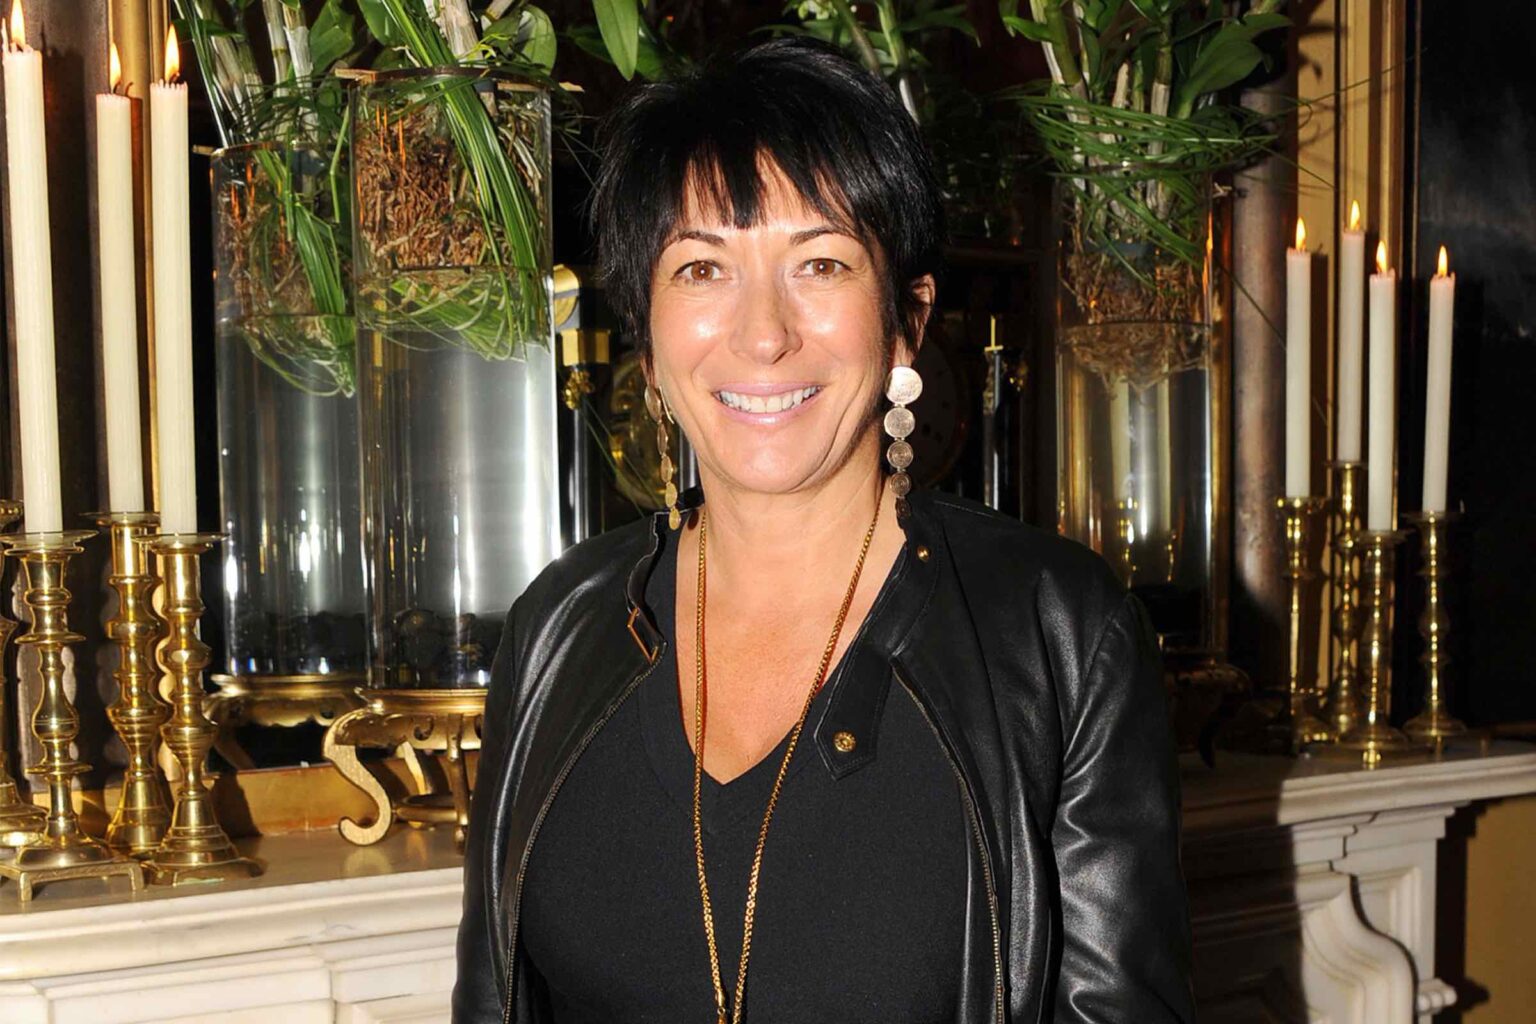 Ghislaine Maxwell may be more of a hypocrite than we give her credit for. Check out this photo of her at a charity event opposing sex trafficking.